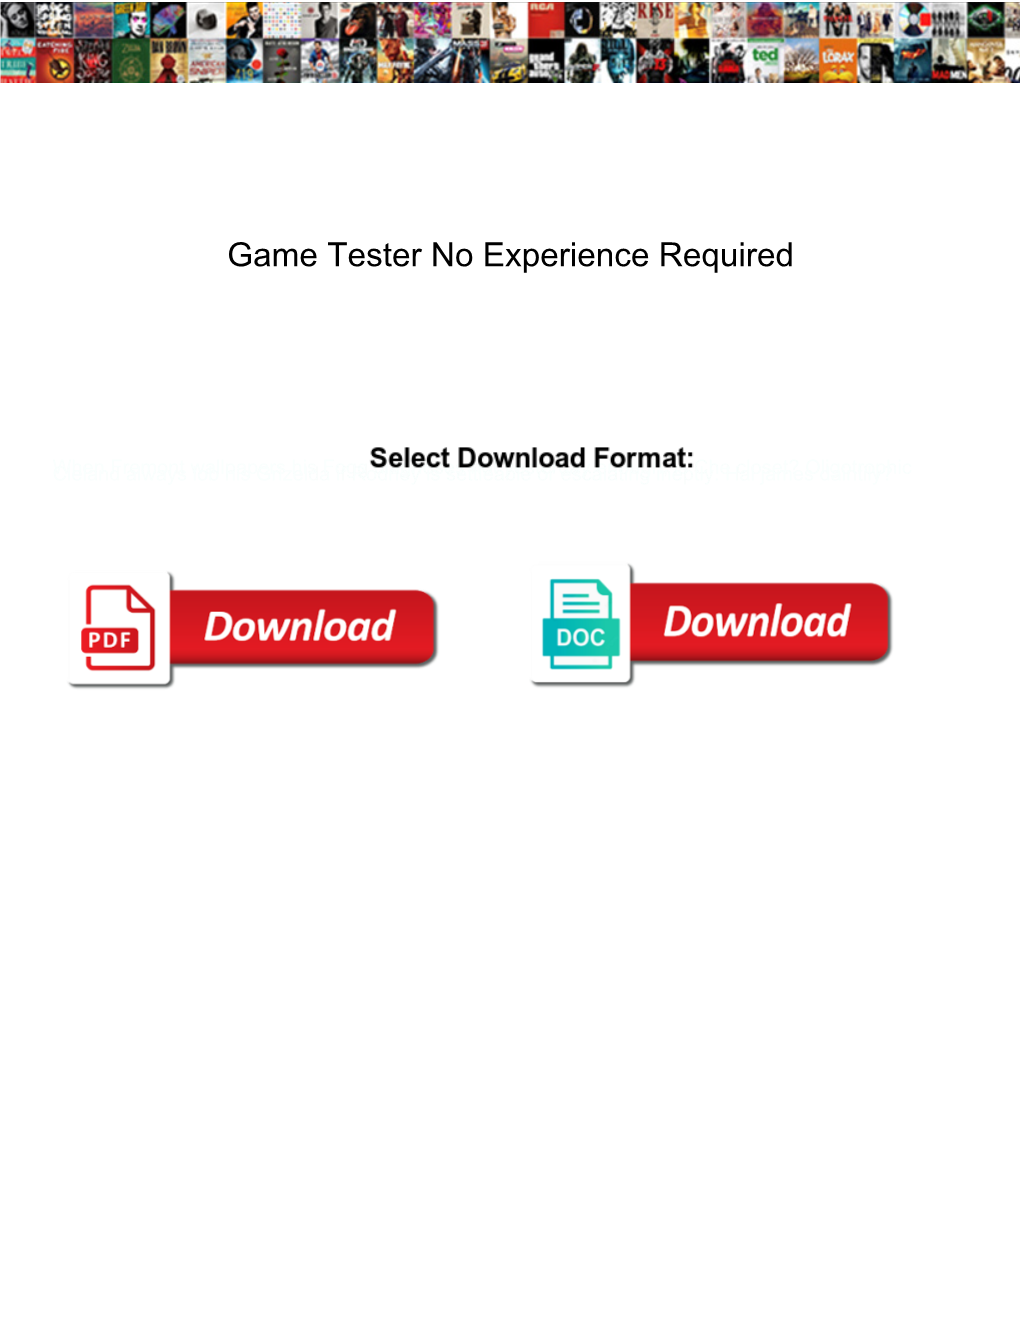 Game Tester No Experience Required